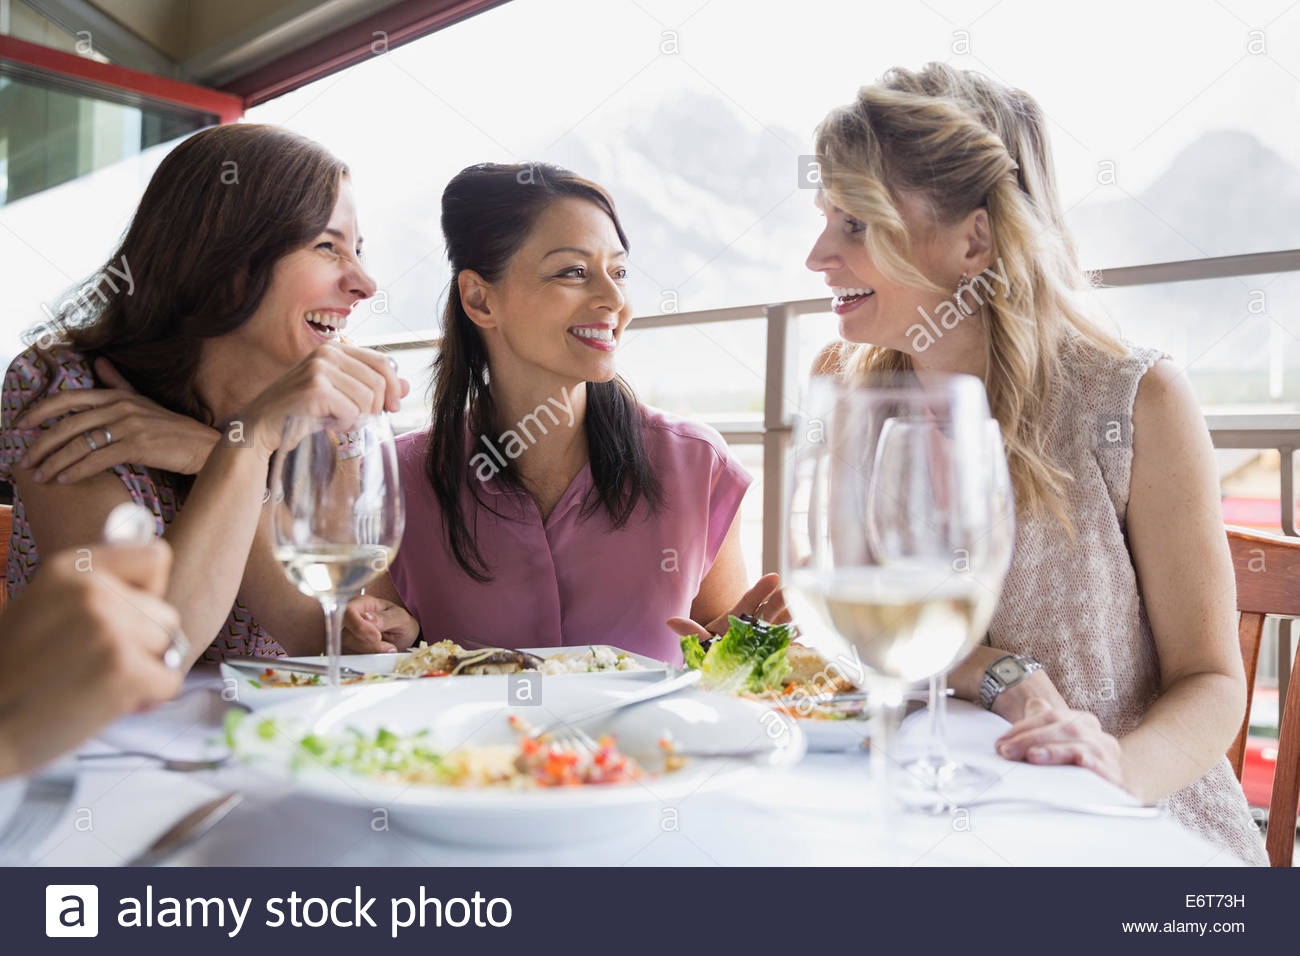 Women eating together in restaurant Stock Photo